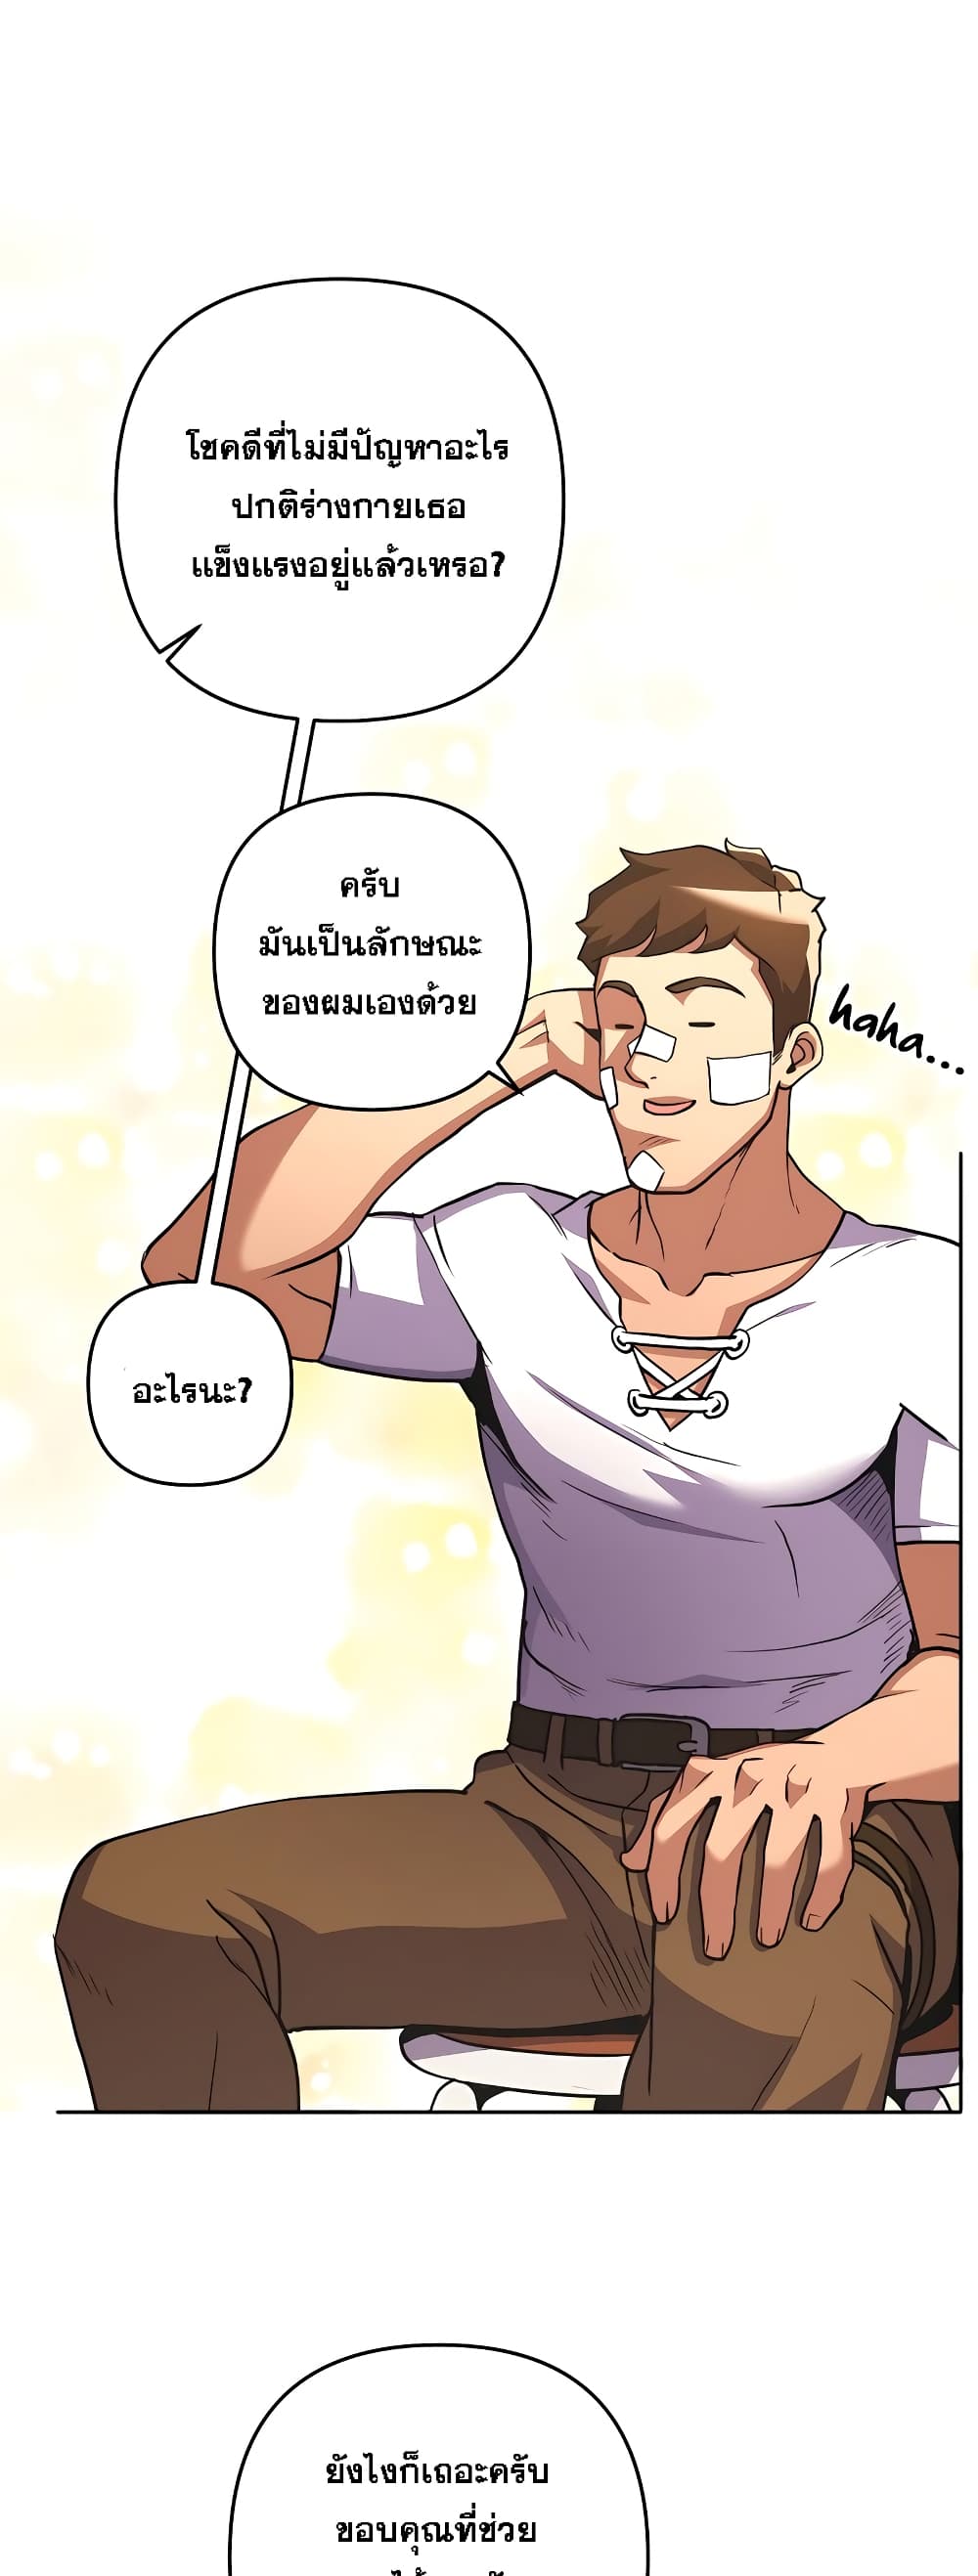 Surviving in an Action Manhwa ตอนที่ 7 (14)